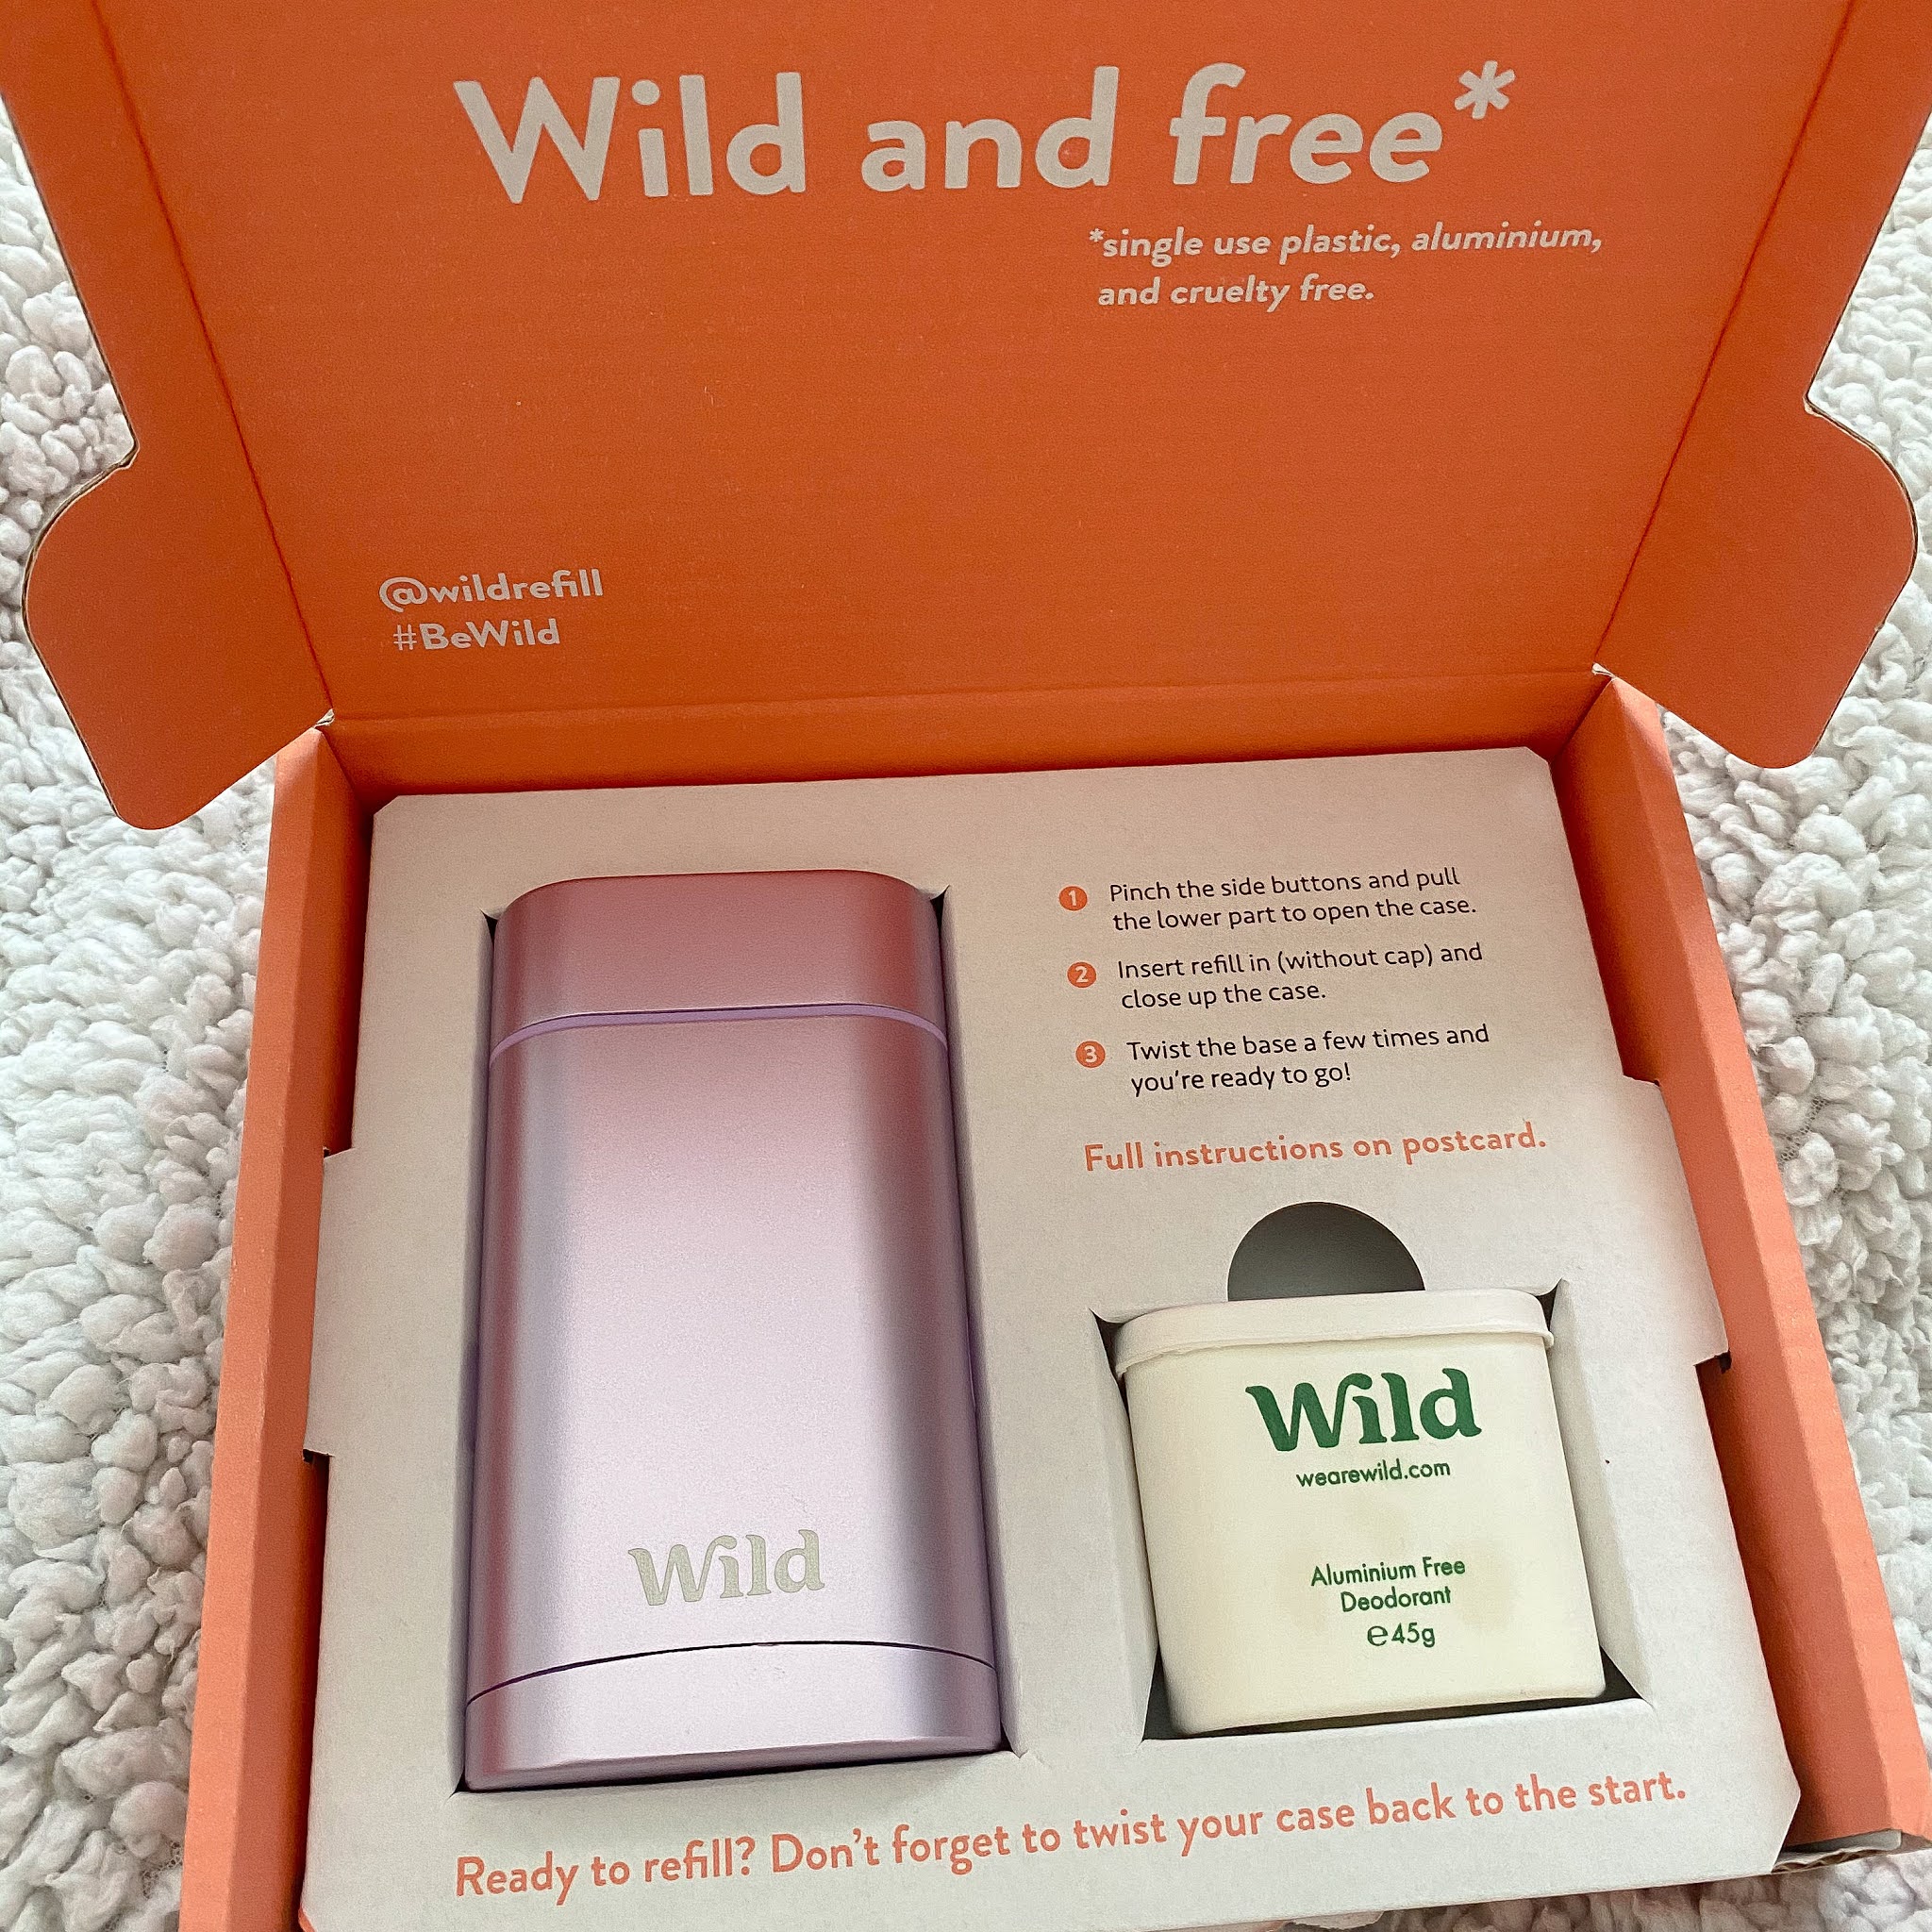 Wild : My review of the Refillable Natural Deodorant